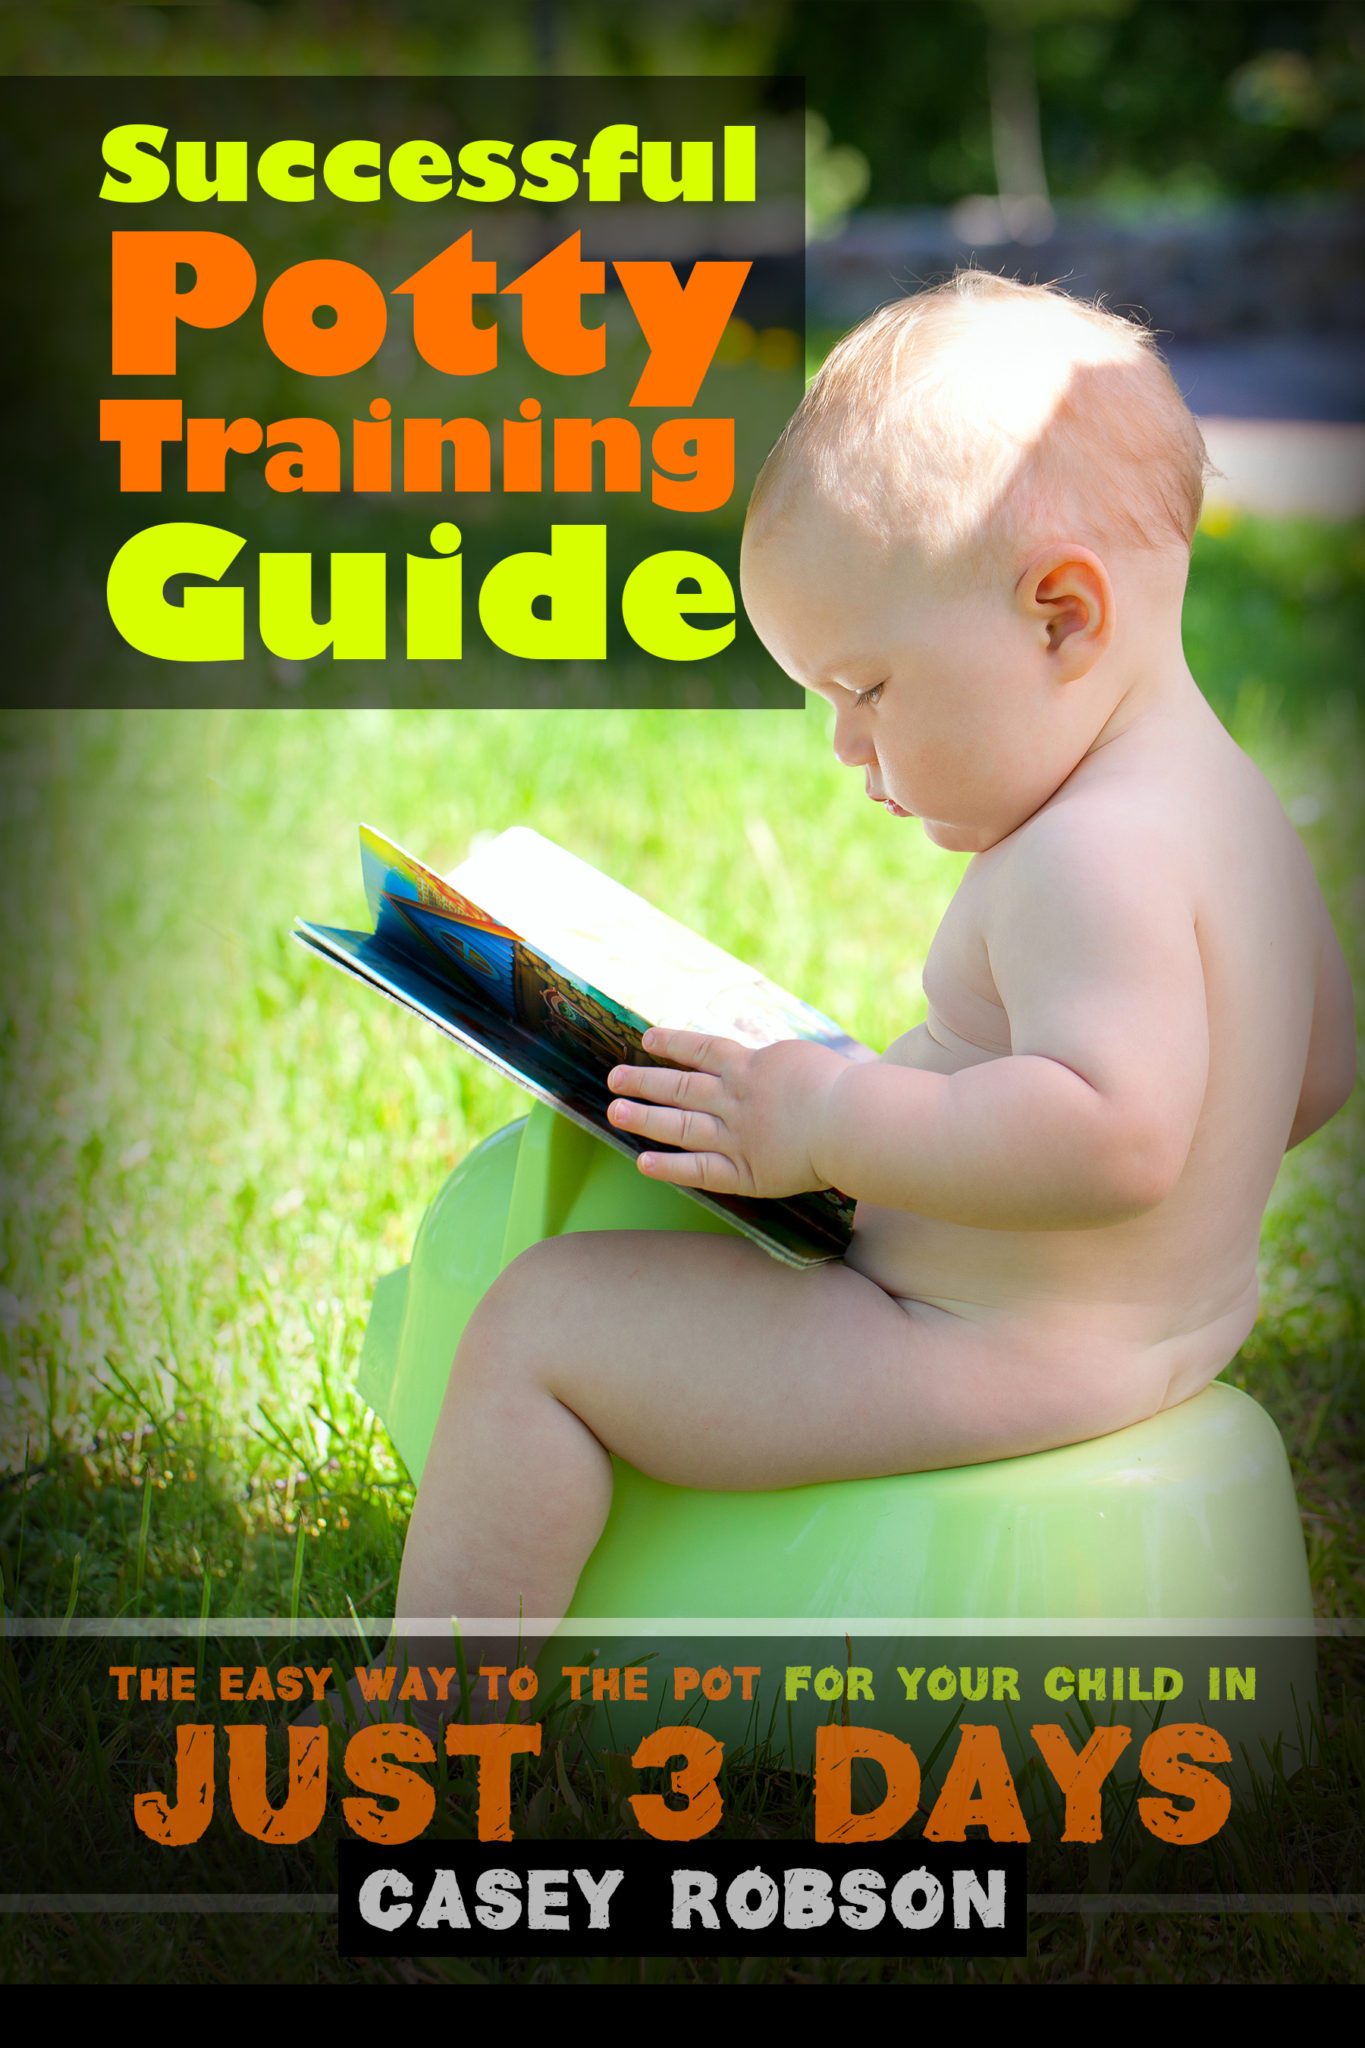 FREE: Successful Potty Training Guide: The Easy Way To the Pot for Your Child in Just 3 Days by Casey Robson